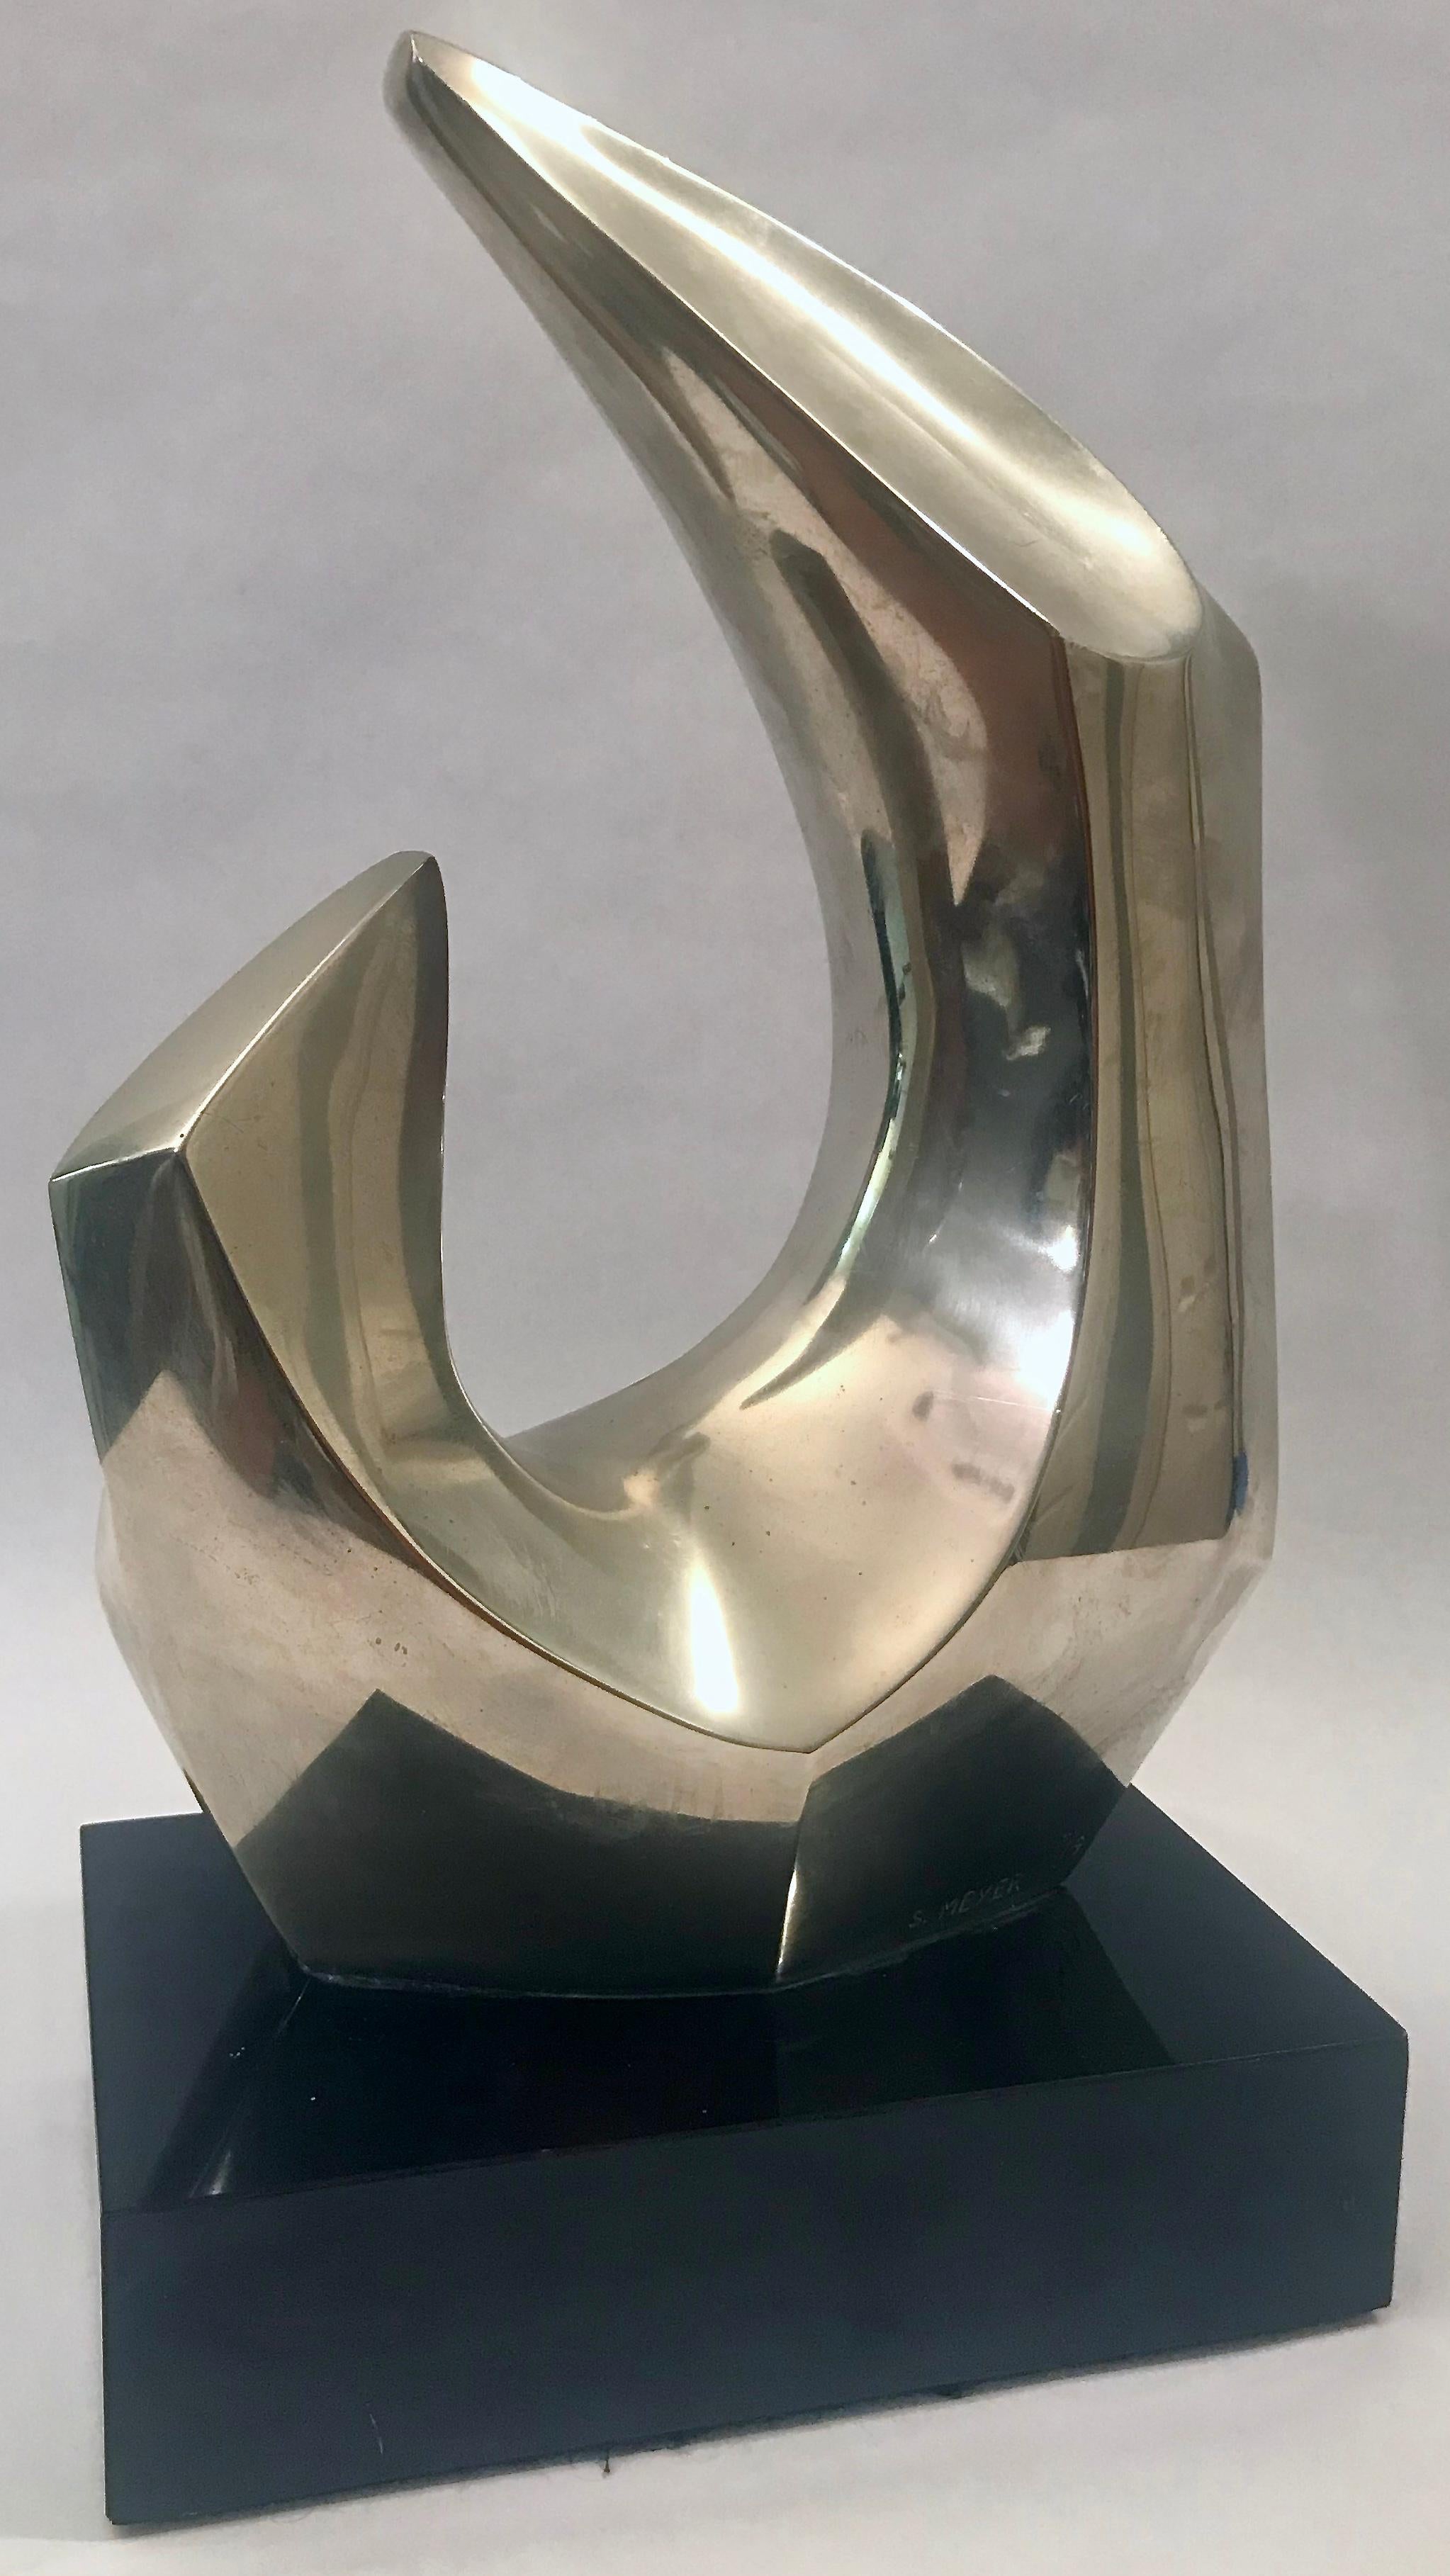 Bronze abstract sculpture by Seymour Meyer, signed and numbered 4/9


Seymour Meyer (Amer. 1914 - 2009). First a student of Louise Nevelson, Meyer became her protege, and then co-collaborator. His biomorphic sculptures were widely exhibited, and